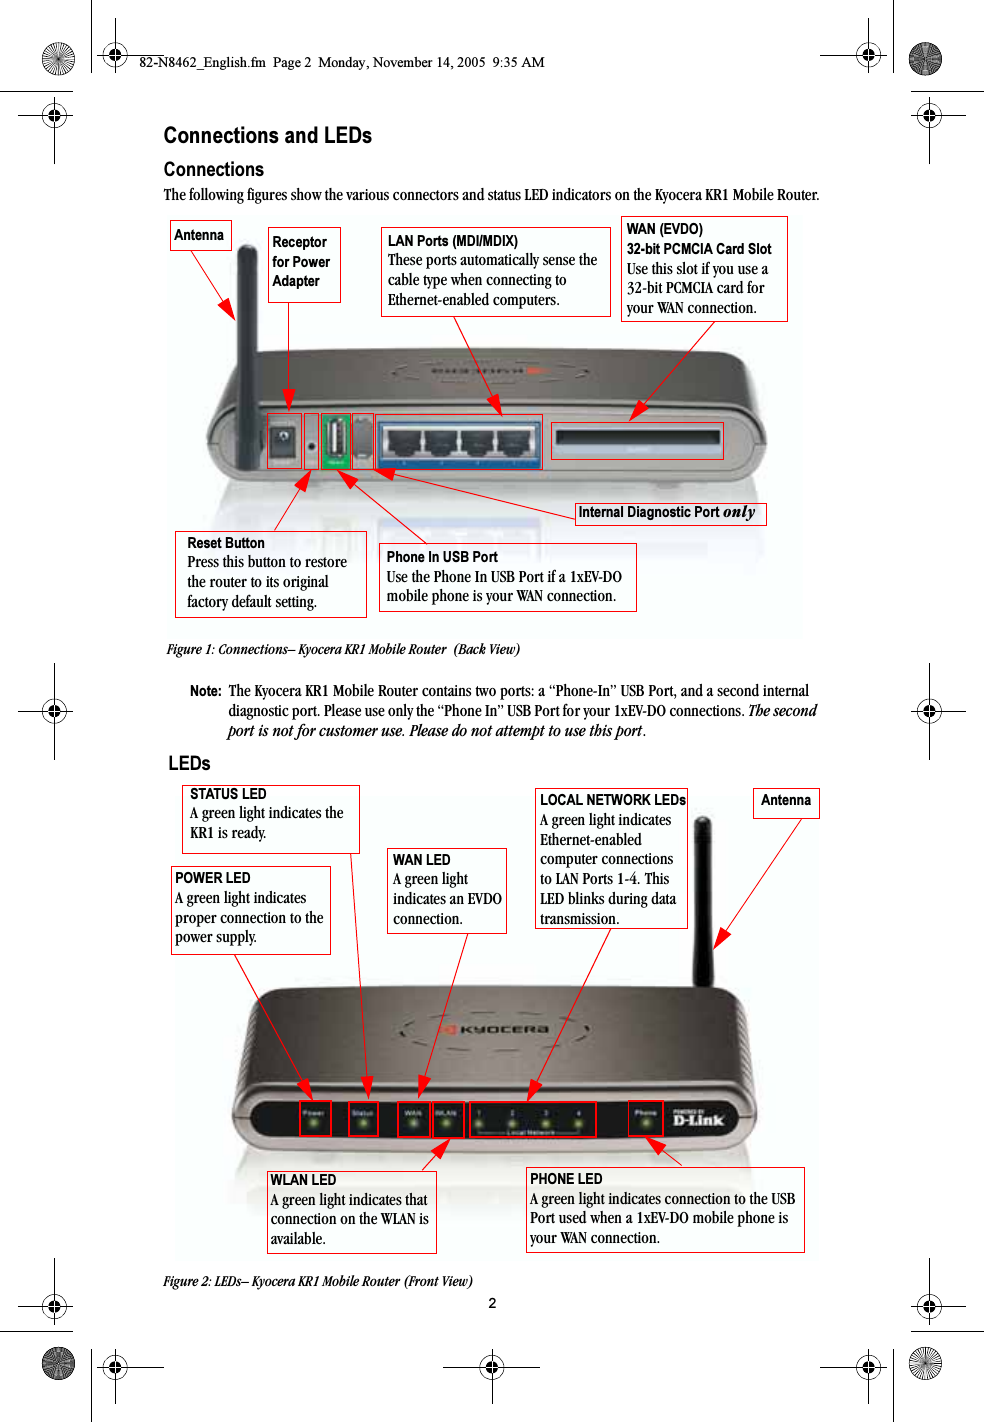 2Connections and LEDsConnectionsThe following figures show the various connectors and status LED indicators on the Kyocera KR1 Mobile Router. Figure 1: Connections– Kyocera KR1 Mobile Router  (Back View)Note:  The Kyocera KR1 Mobile Router contains two ports: a “Phone-In” USB Port, and a second internal diagnostic port. Please use only the “Phone In” USB Port for your 1xEV-DO connections. The second port is not for customer use. Please do not attempt to use this port. LEDsFigure 2: LEDs– Kyocera KR1 Mobile Router (Front View)LAN Ports (MDI/MDIX)These ports automatically sense the cable type when connecting to Ethernet-enabled computers.Receptor for Power Adapter Reset ButtonPress this button to restore the router to its original factory default setting.Phone In USB PortUse the Phone In USB Port if a 1xEV-DO  mobile phone is your WAN connection.Antenna WAN (EVDO) 32-bit PCMCIA Card SlotUse this slot if you use a 32-bit PCMCIA card for your WAN connection.Internal Diagnostic Port=çåäóSTATUS LEDA green light indicates the KR1 is ready.POWER LEDA green light indicates proper connection to the power supply.LOCAL NETWORK LEDsA green light indicates  Ethernet-enabled computer connections to LAN Ports 1-4. This LED blinks during data transmission.PHONE LEDA green light indicates connection to the USB Port used when a 1xEV-DO mobile phone is your WAN connection.WLAN LEDA green light indicates that connection on the WLAN is available.AntennaWAN LEDA green light  indicates an EVDO connection. 82-N8462_English.fm  Page 2  Monday, November 14, 2005  9:35 AM